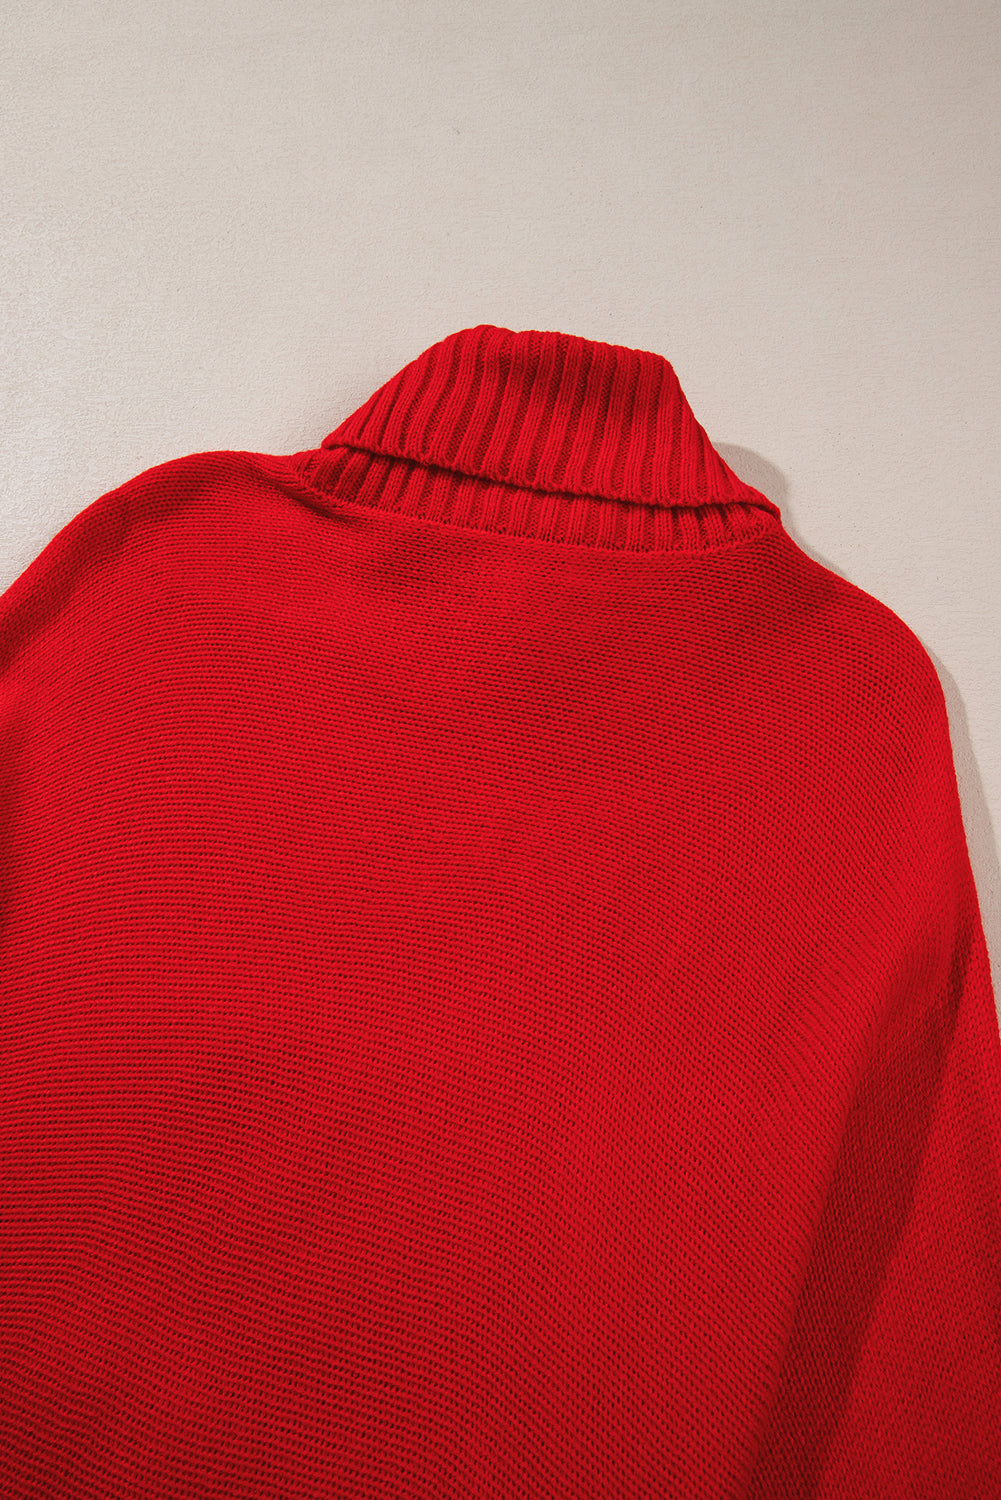 Red Merry Letter Embroidered High Neck Sweater